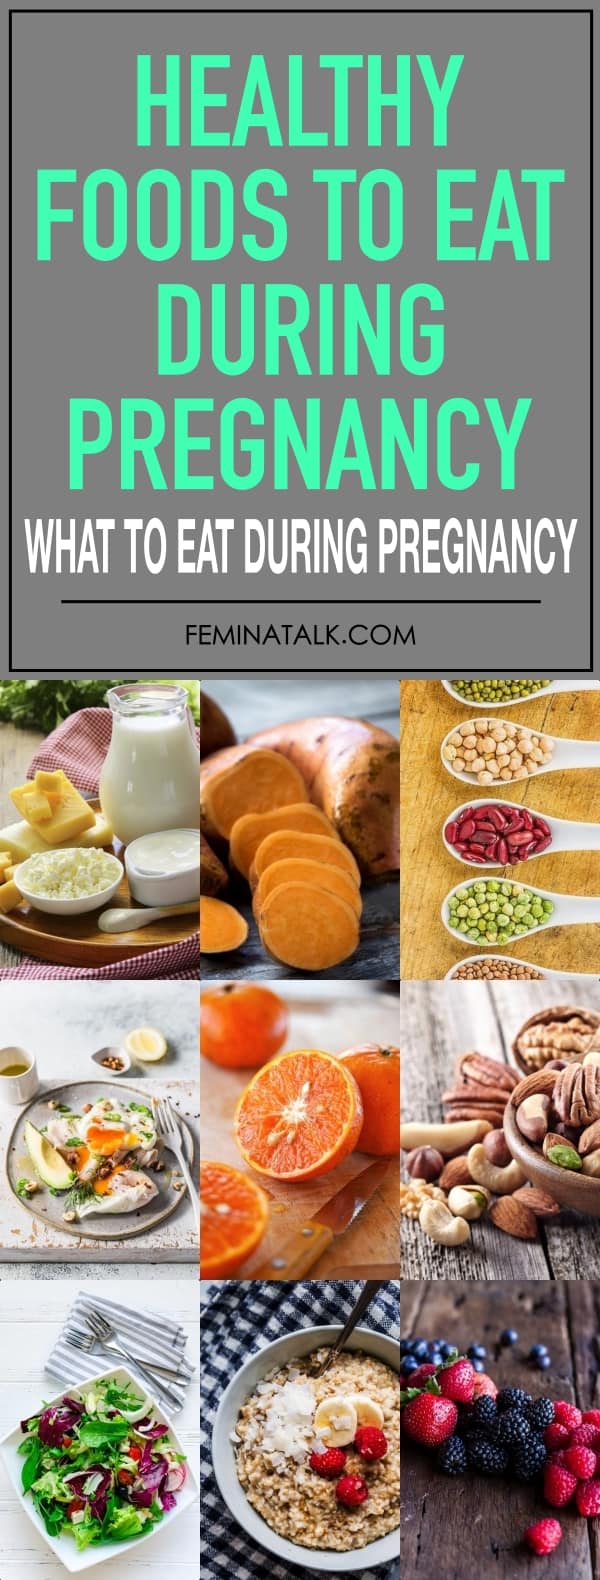 Healthy Foods to Eat During Pregnancy